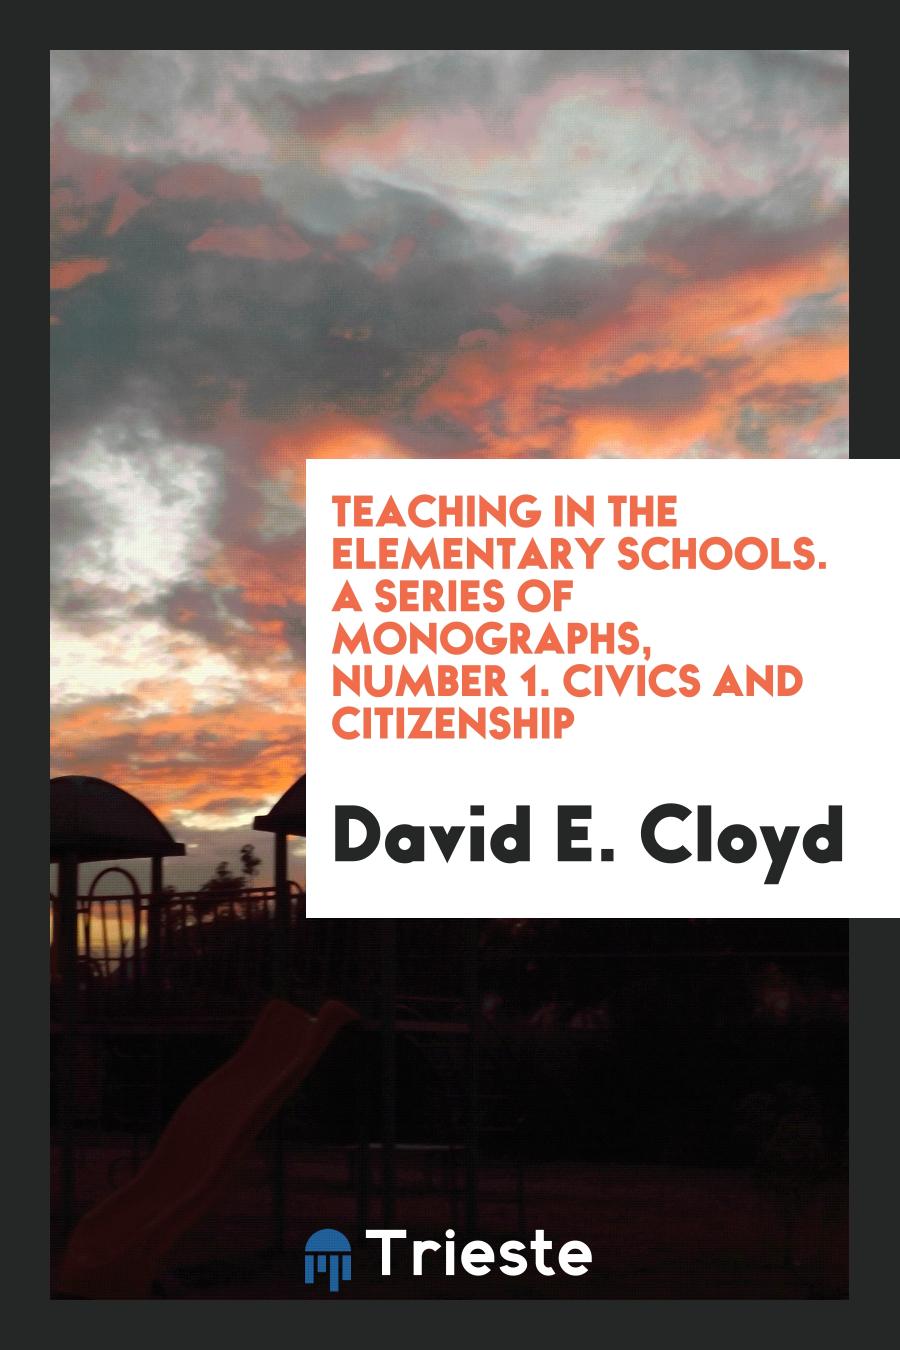 Teaching in the elementary schools. A series of monographs, number 1. Civics and Citizenship